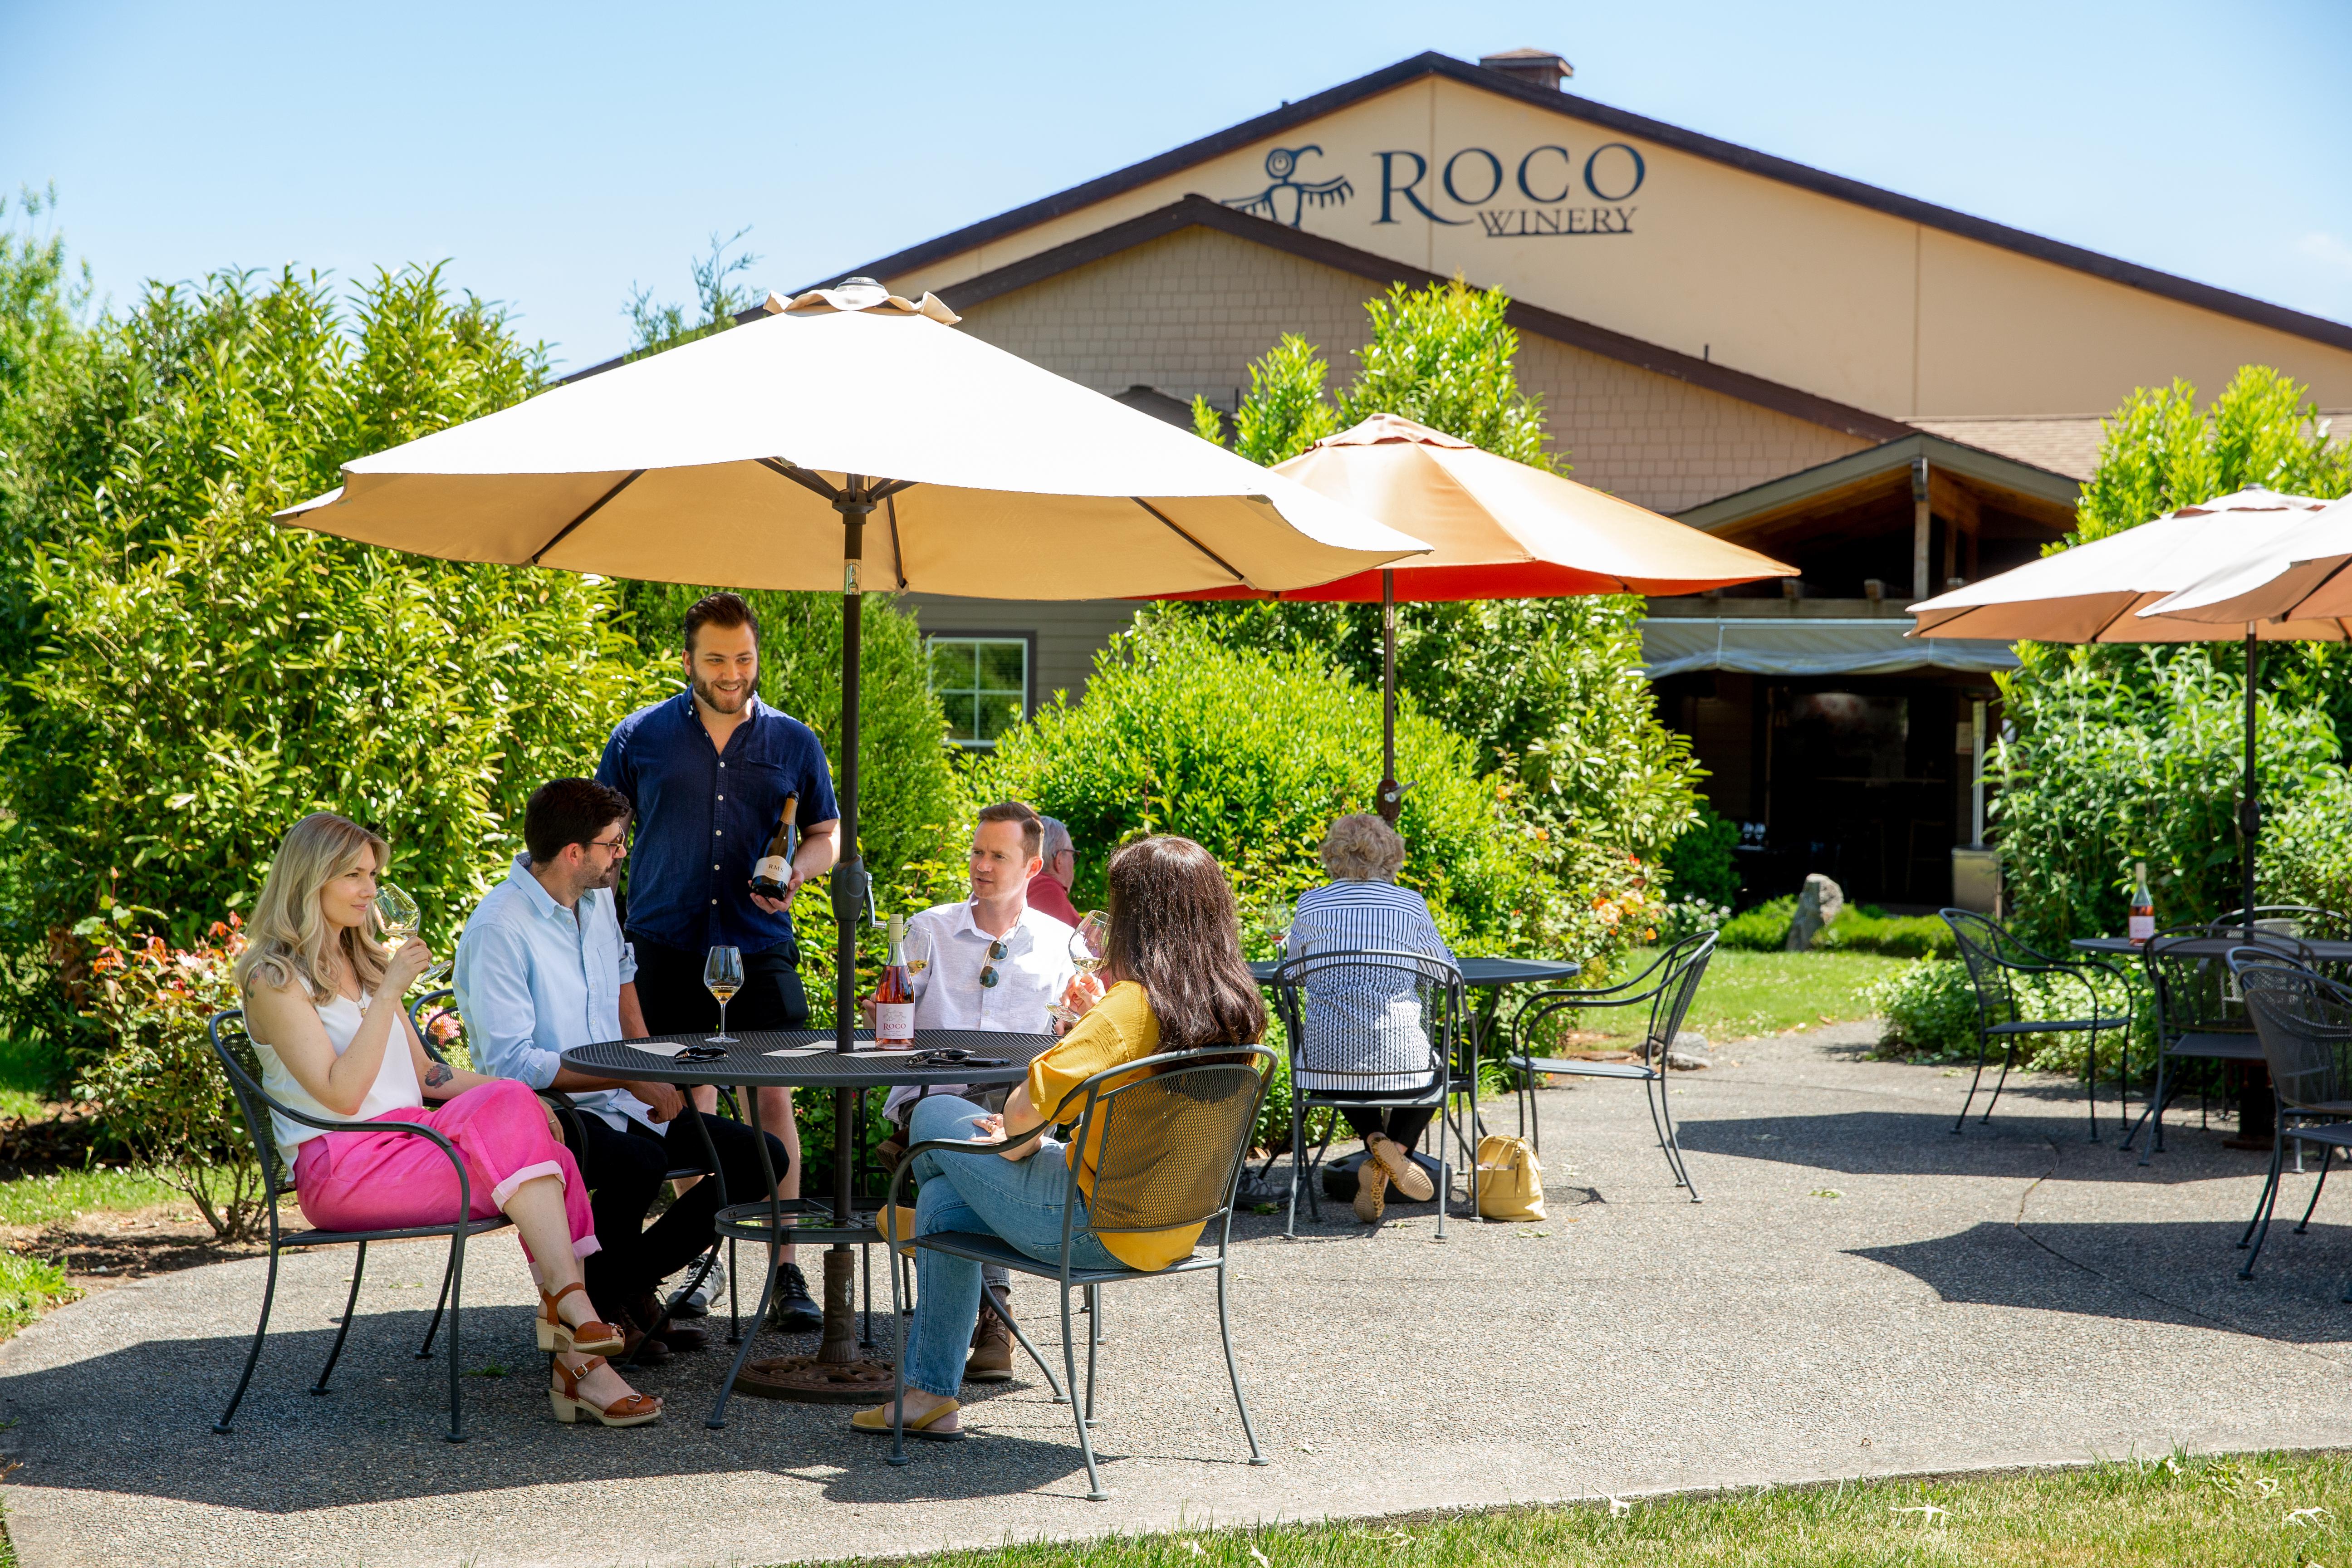 people seated at patio table with umbrella outside of building with sign for ROCO winery